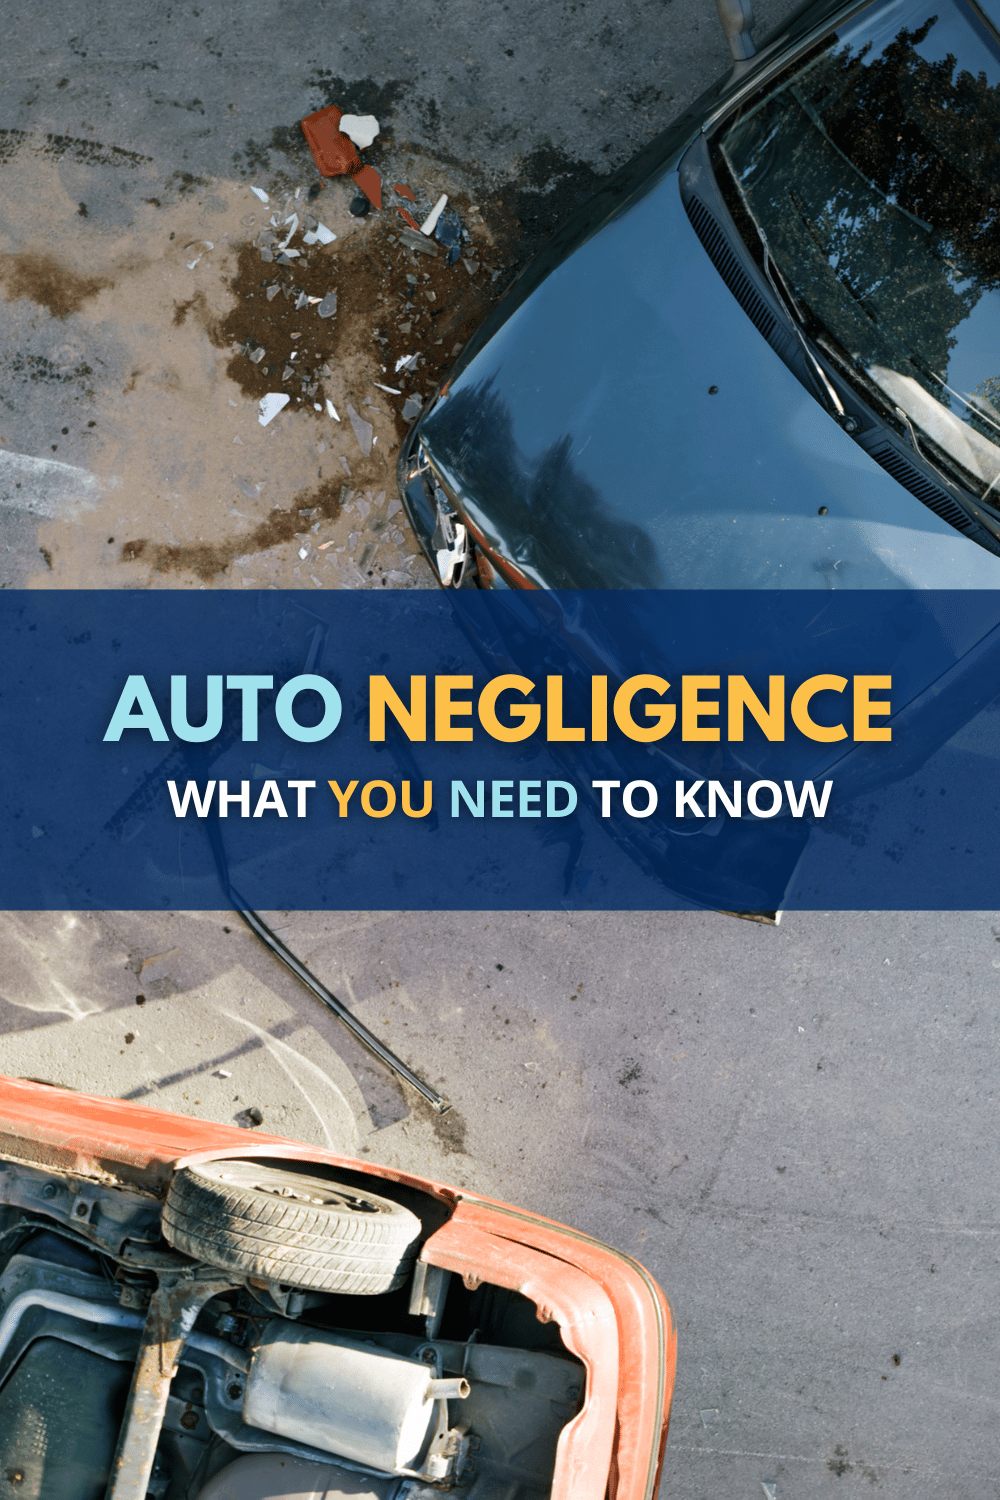 What is Auto Negligence?